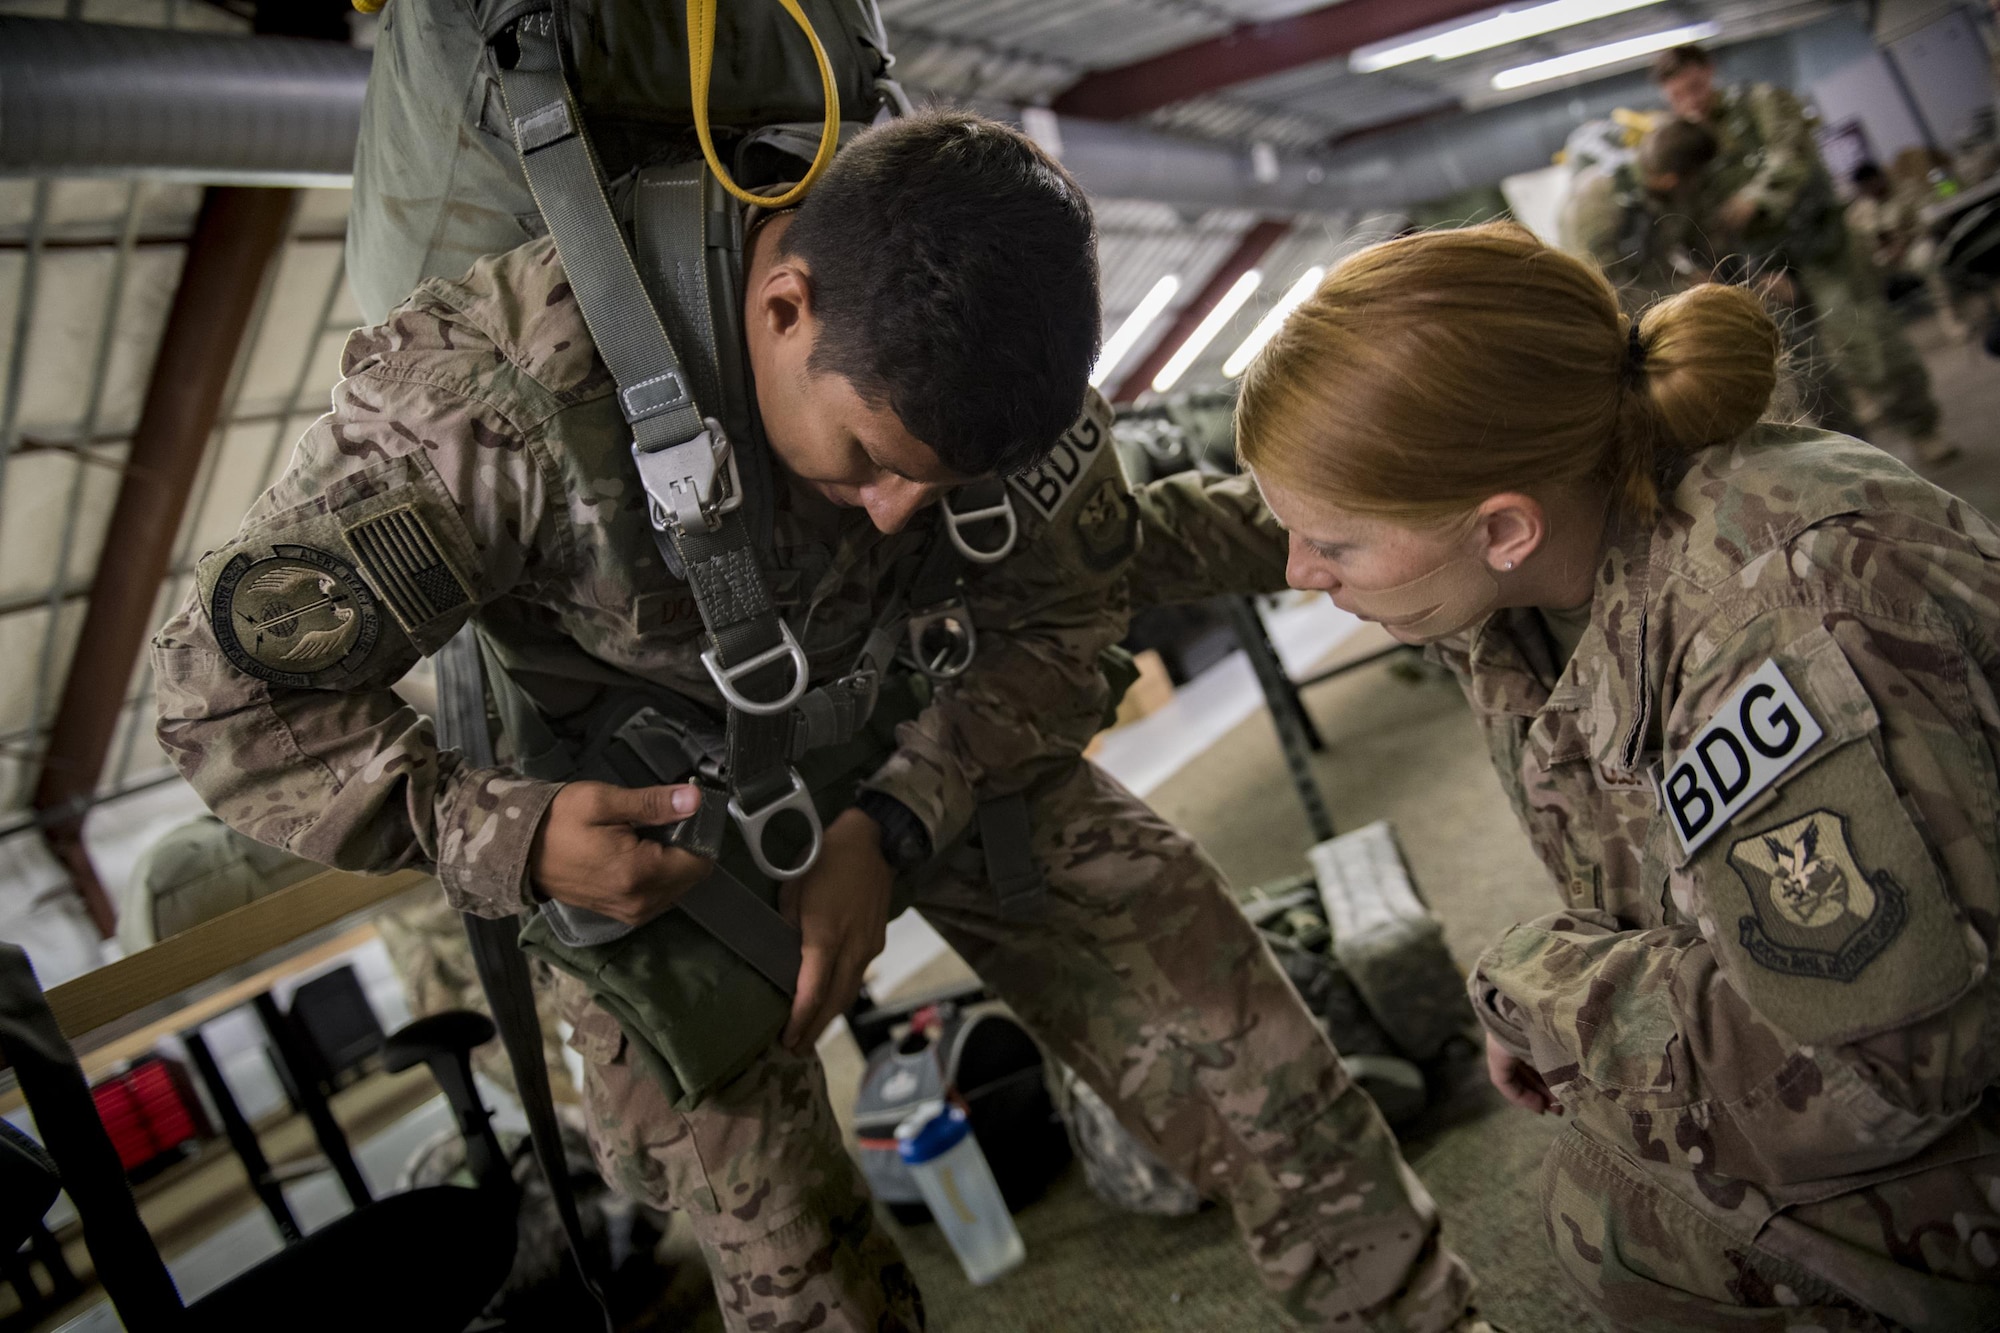 Staff Sgt. Luis Dominguez and Senior Airman Jenny Walker, 823d Base Defense Squadron close precision engagement team members, ensure Dominguez’s gear is equipped properly, July 21, 2017, at Moody Air Force Base, Ga. This training was in preparation for an upcoming mission readiness exercise where airmen serve as an airborne advanced team, with the mission to create an initial presence and clear a path for follow-on forces to arrive on scene. (U.S. Air Force photo by Airman 1st Class Daniel Snider)